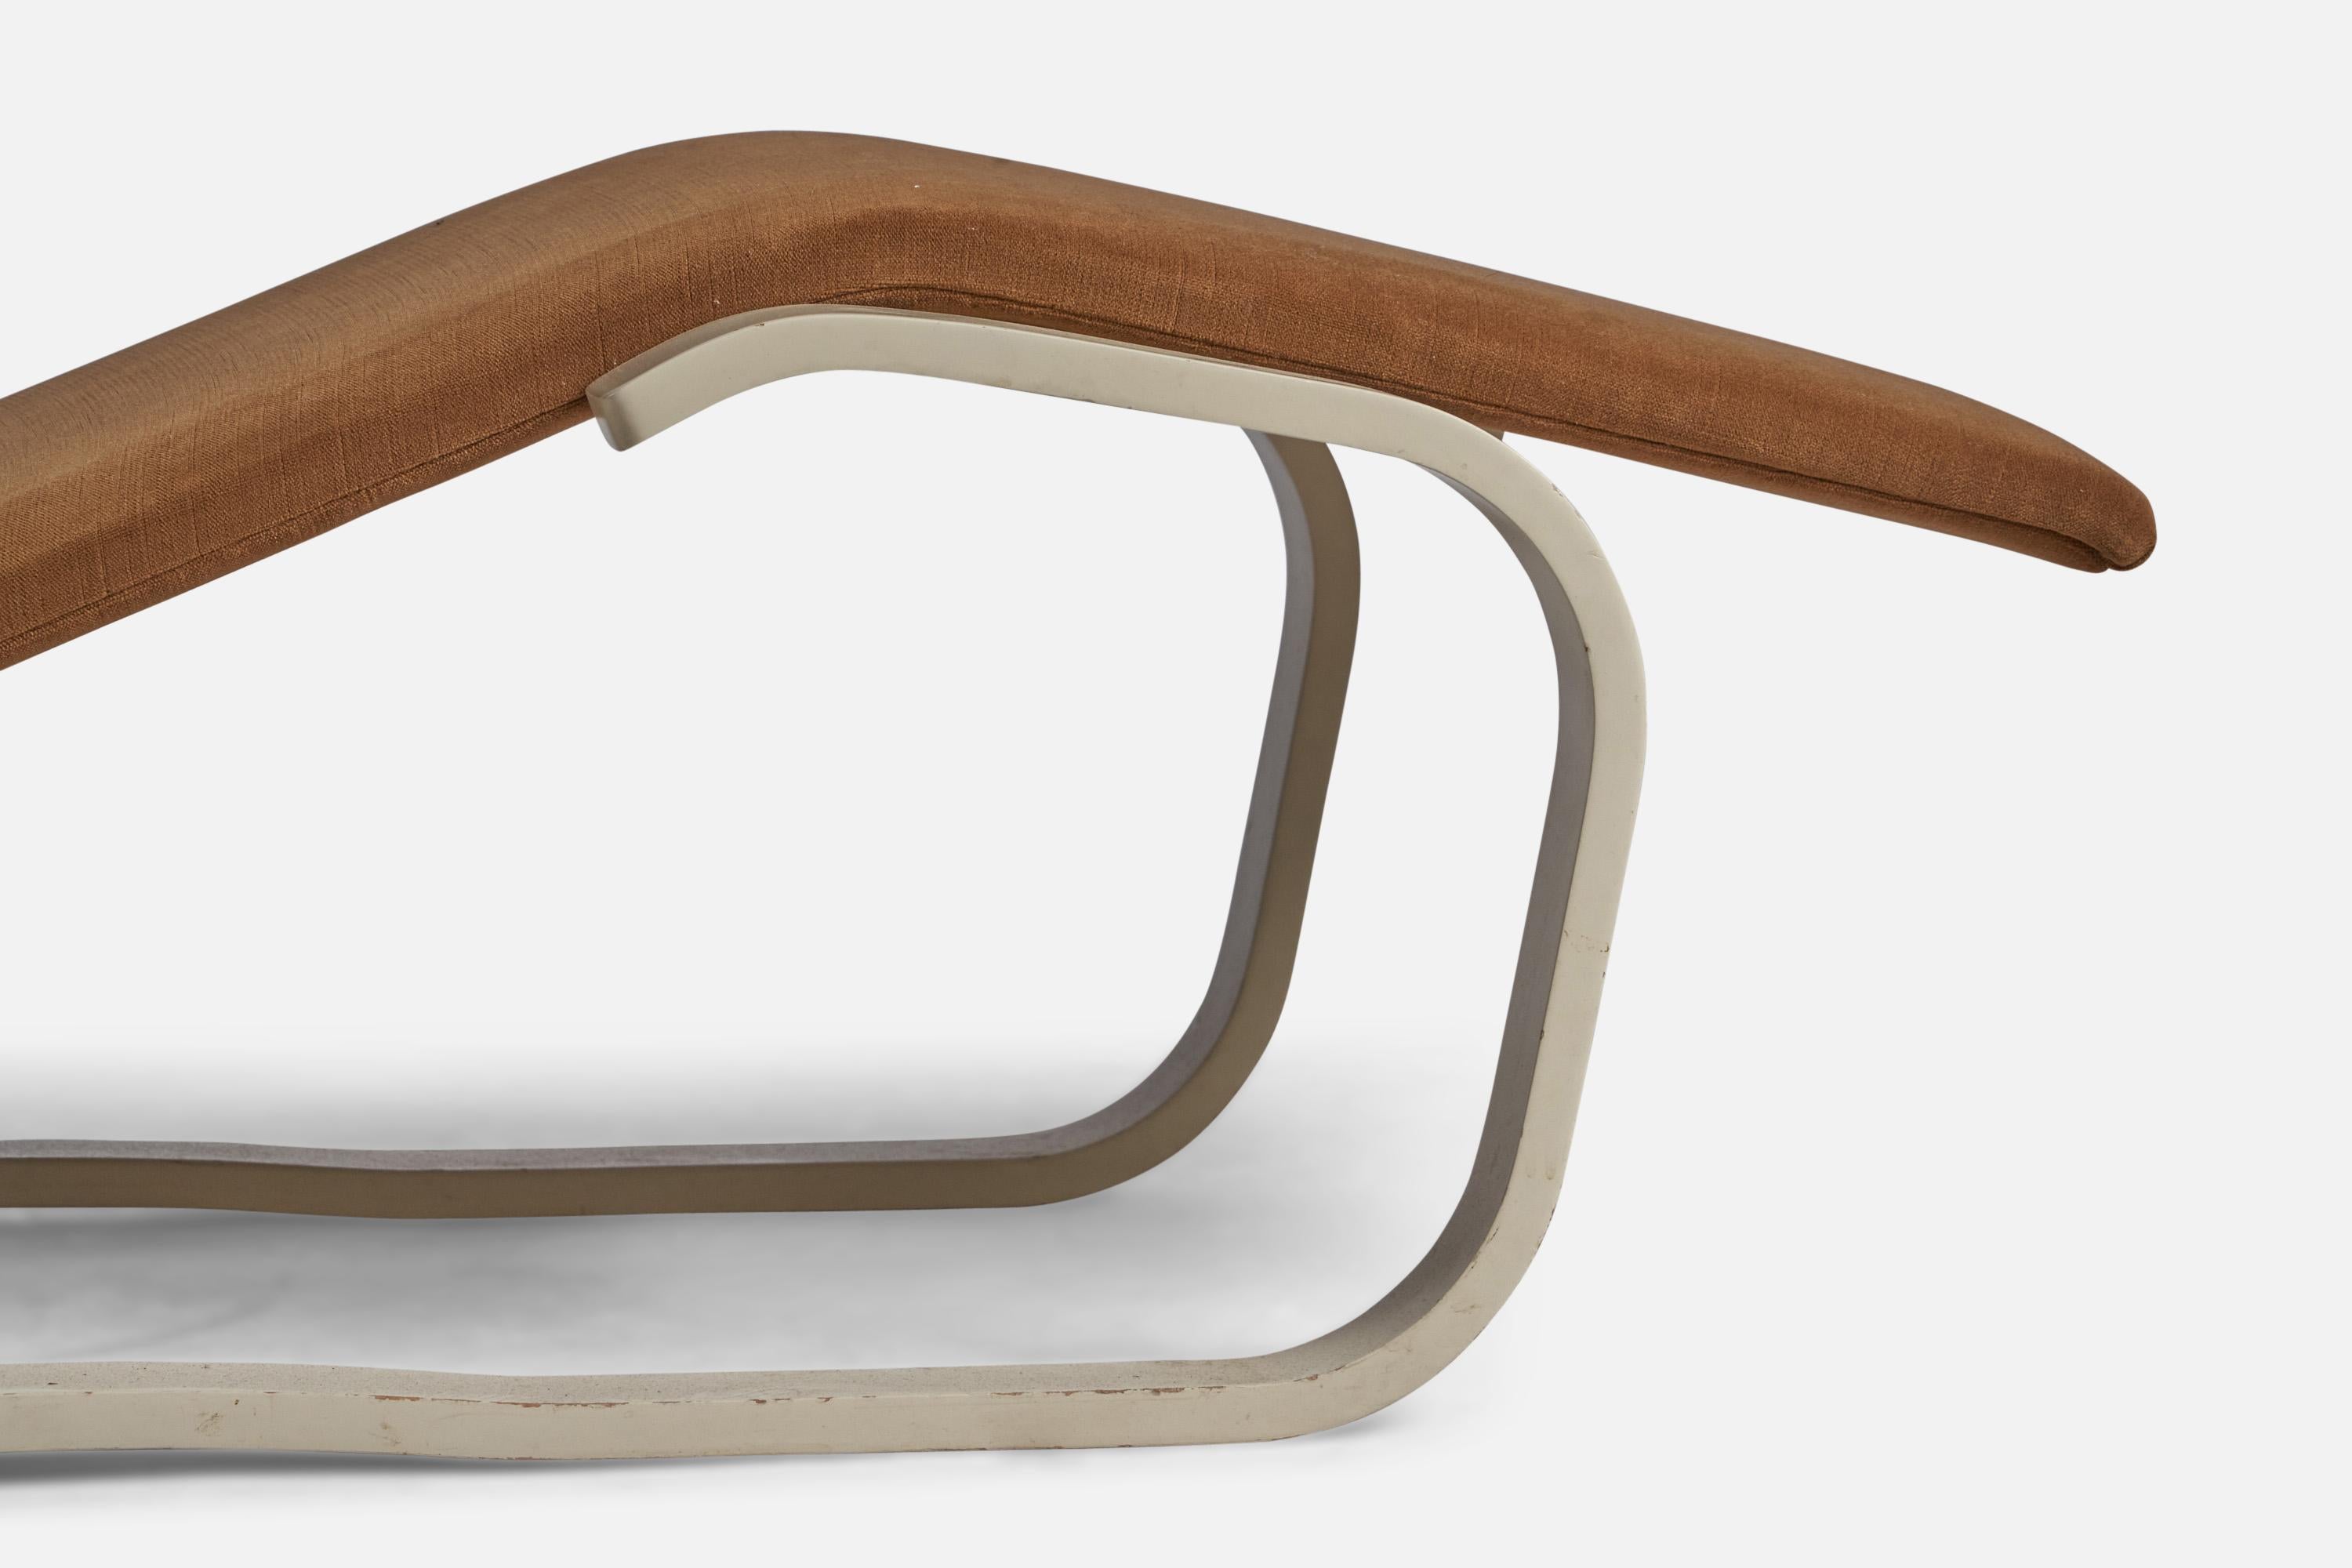 Marcel Breuer, Chaise Longue, Wood, Fabric, USA, 1960s For Sale 2